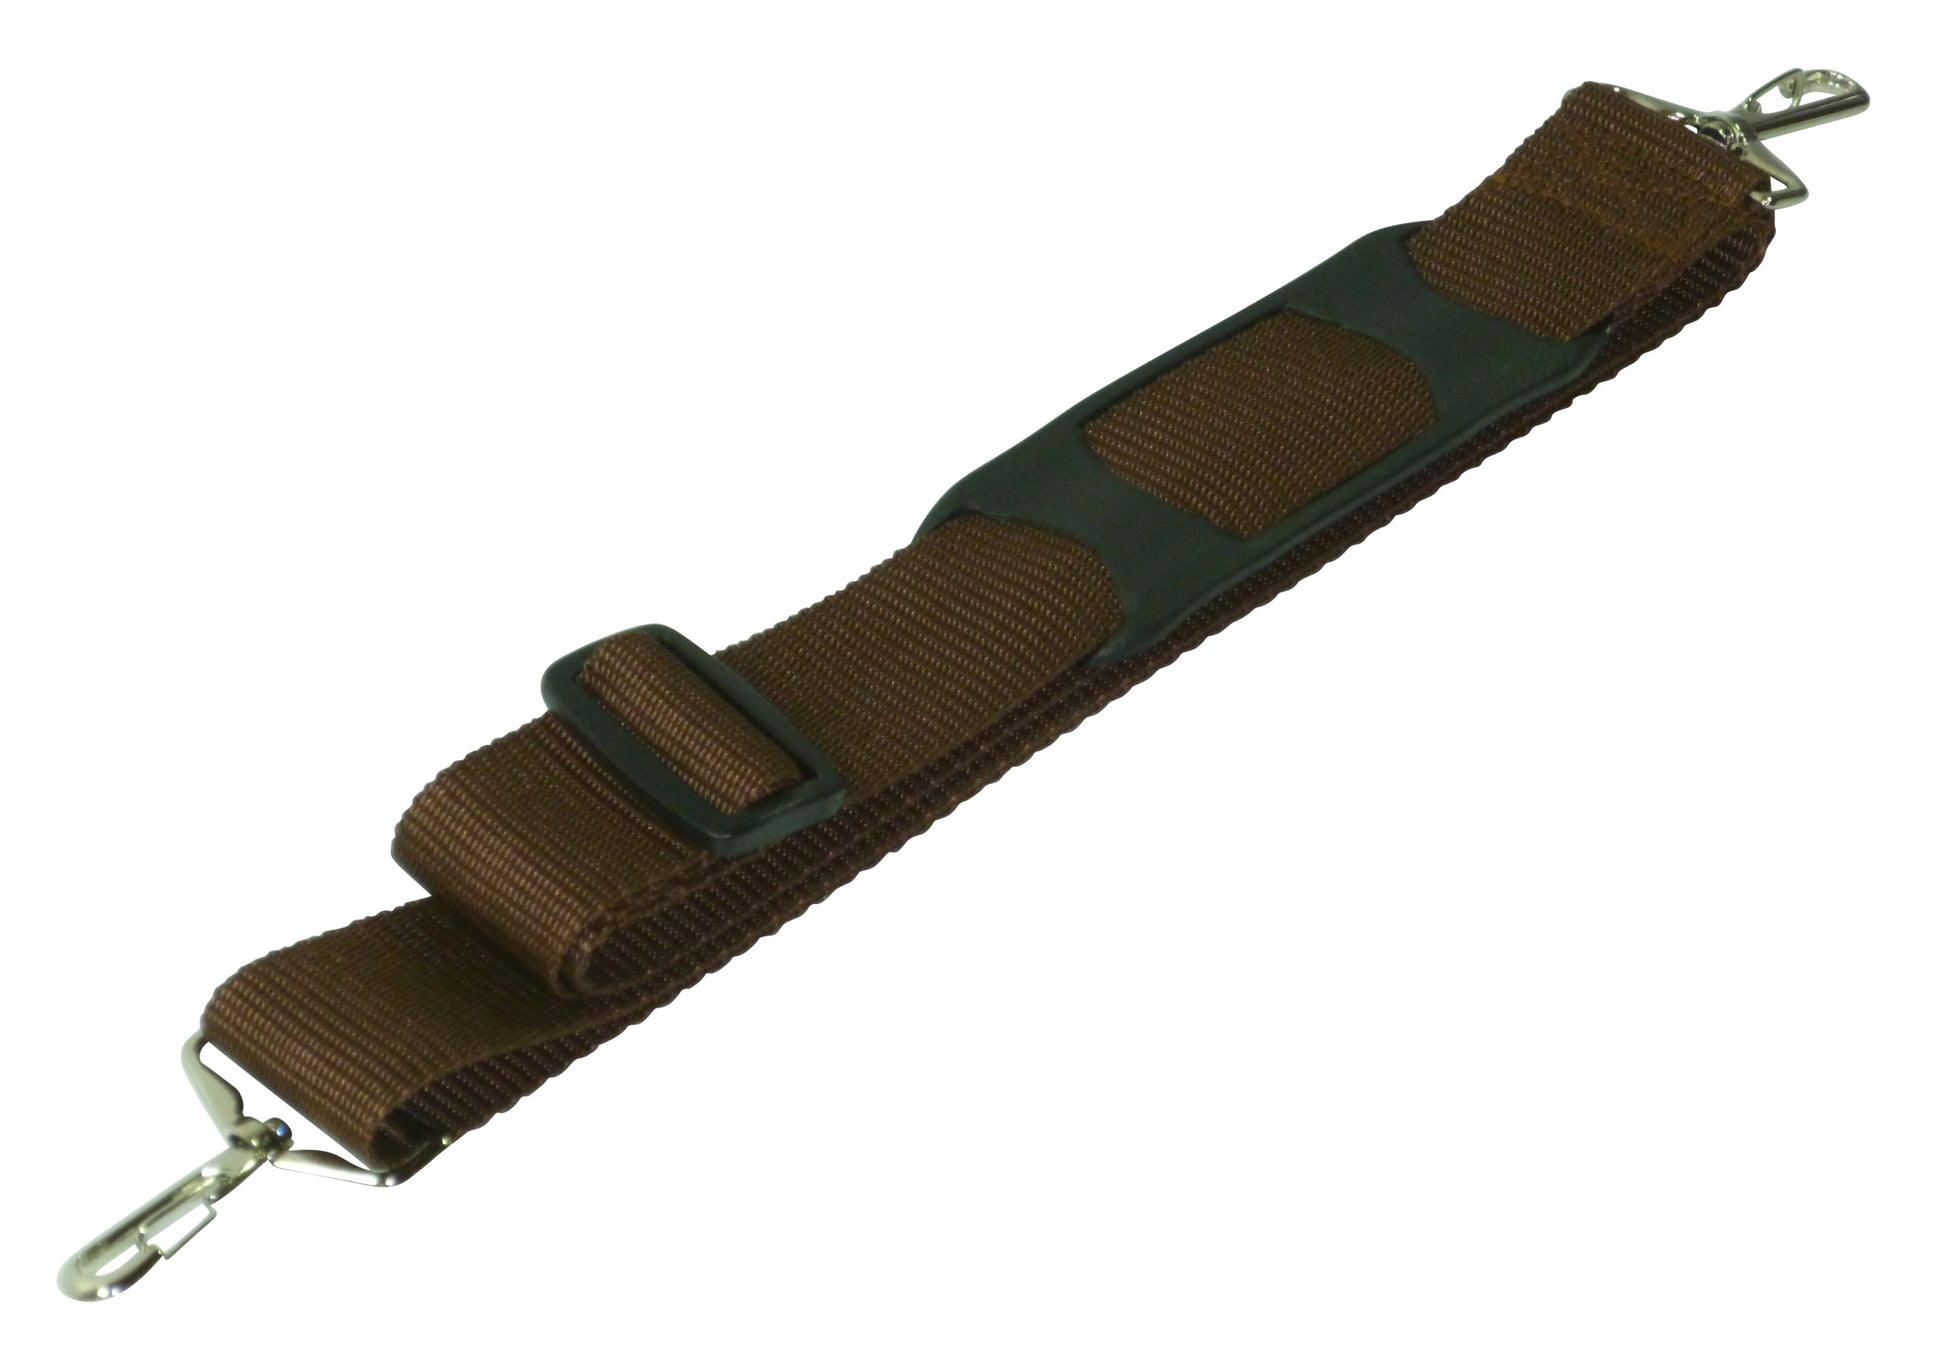 38mm Bag Strap with Metal Buckles and Shoulder Pad, 150cm in brown